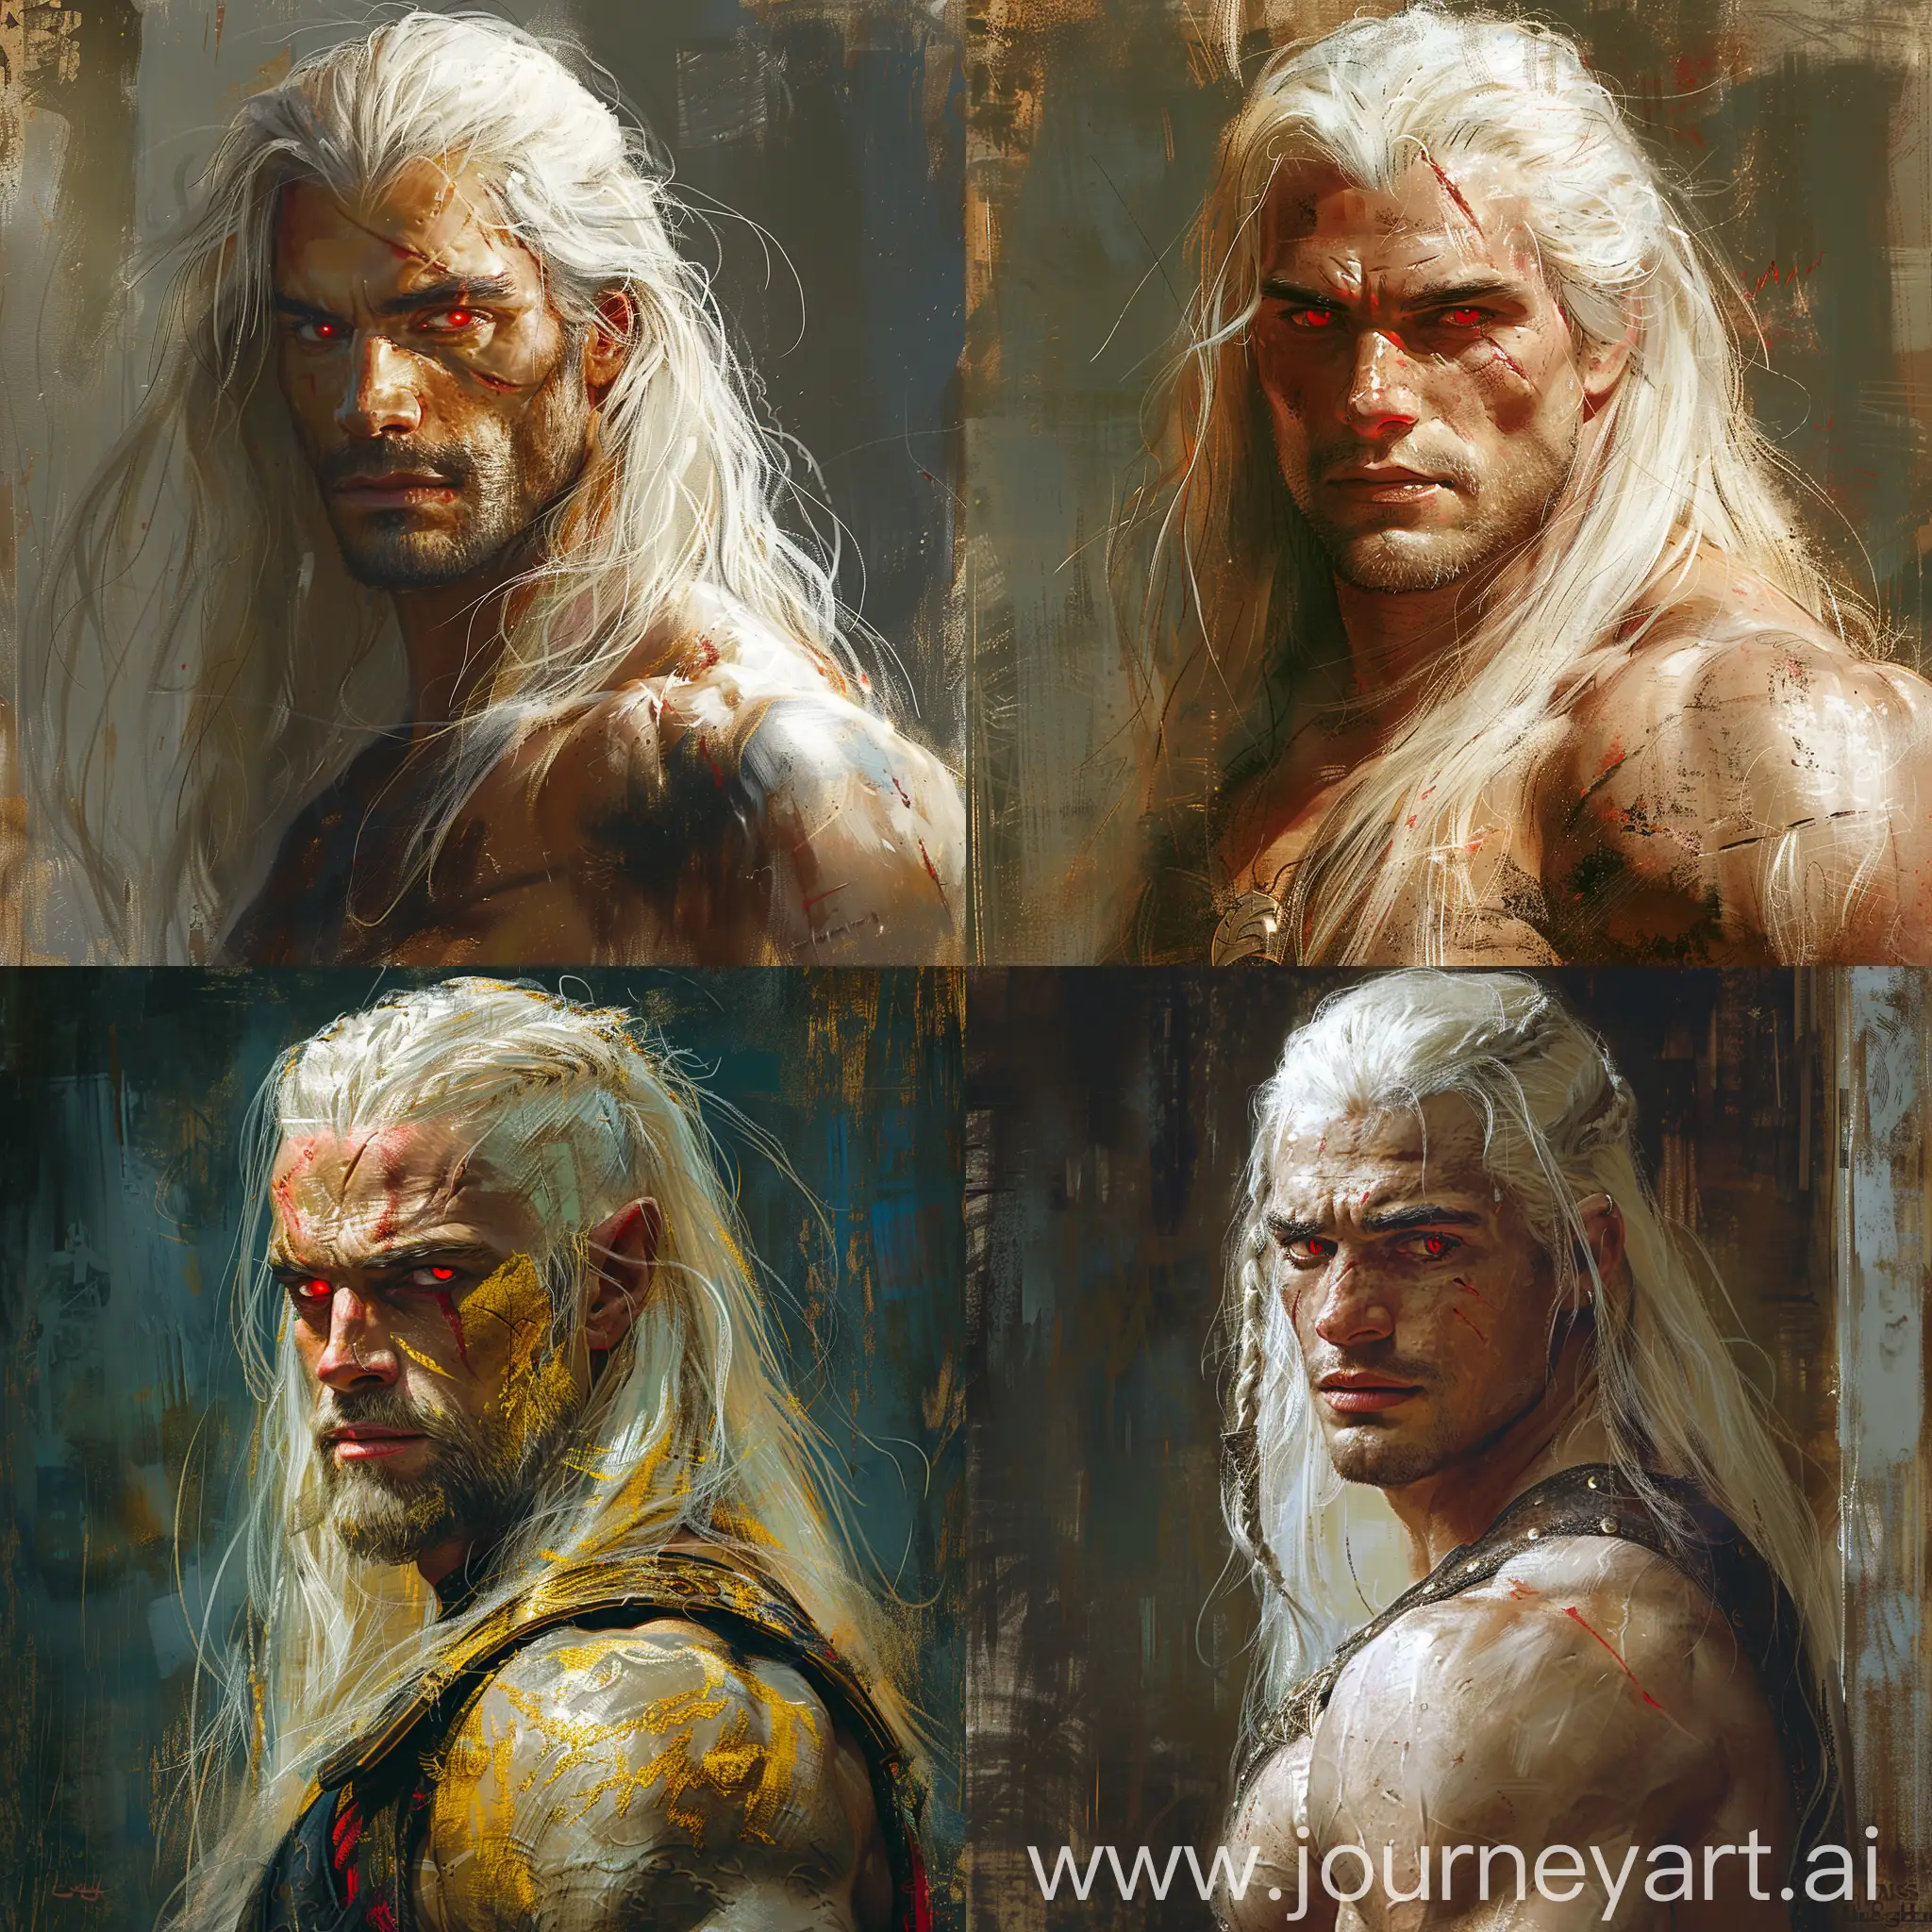 Subject: a Warrior of Warrior s; skin Purer than gold, red eyes, long white hair, muscular,  looking at The camera, emanates power that can rewrite infinities. Style/coloring: extremely realistic painted realism, detailed digital painting concept art, detailed painting by Gaston Bussière, Craig Mullins. A mystical, dreamlike portrait in a cinematic style, Ed Emsh, Virgil Finlay, Norman Saunders, Hubert Rogers, Earle Bergey, Kelly Freas --upbeta --s 250 --v 6 -- --v 6 --ar 1:1 --